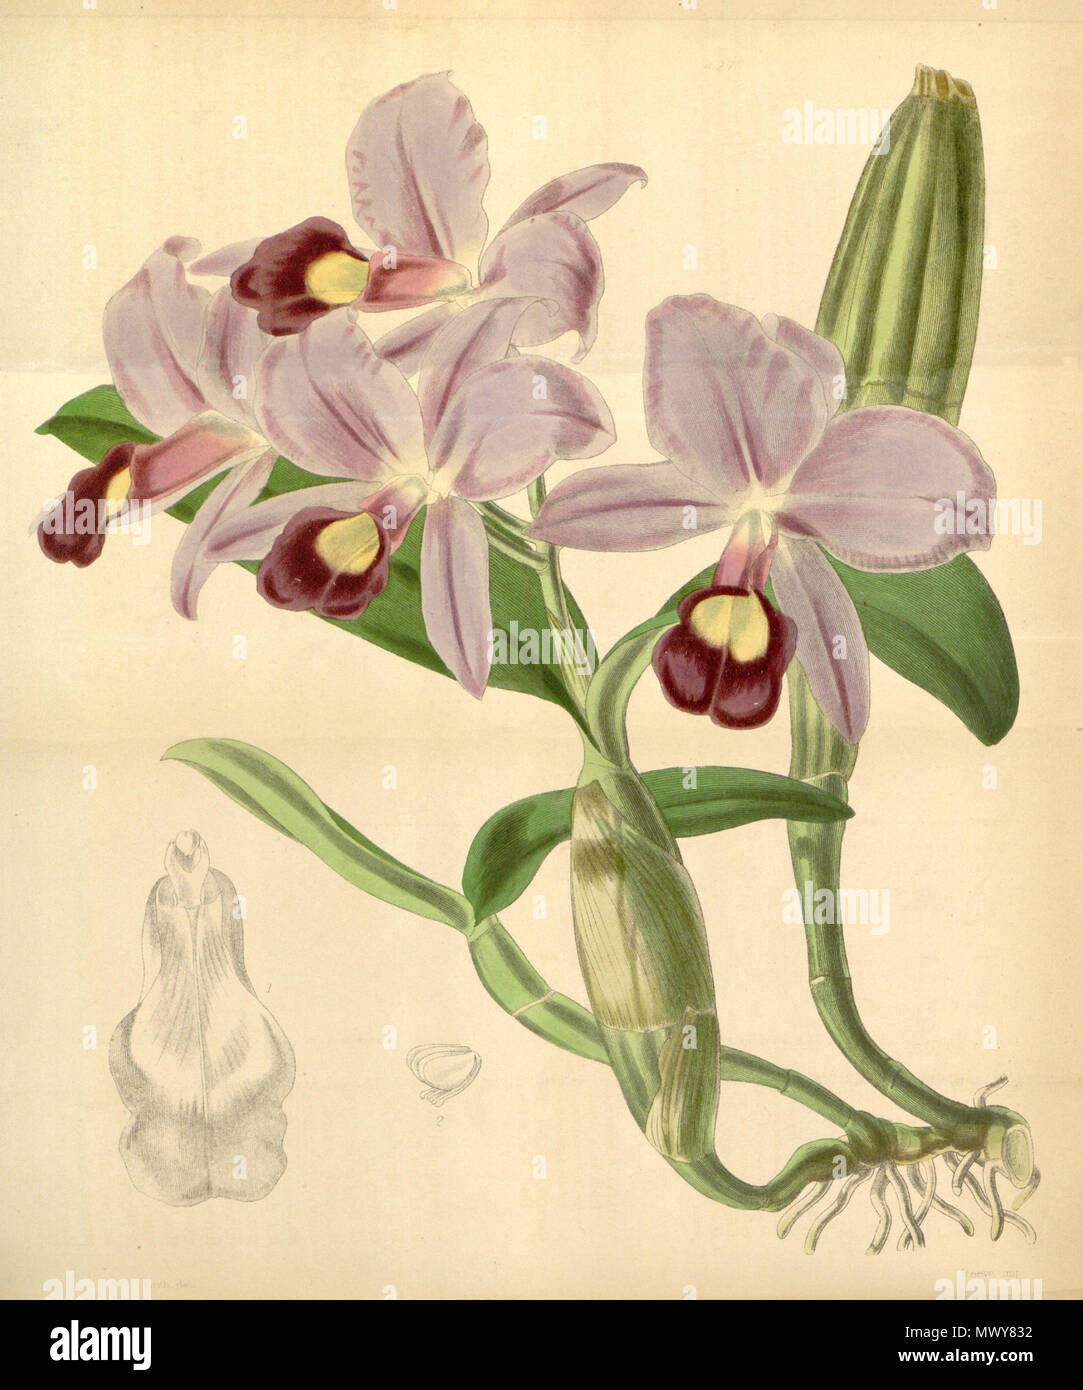 . Illustration of Guarianthe skinneri (as syn. Cattleya skinneri) . 1846. Walter Hood Fitch (1817-1892) del. 256 Guarianthe skinneri (as Cattleya skinneri) - Curtis' 72 (Ser. 3 no. 2) pl. 4270 (1846) Stock Photo